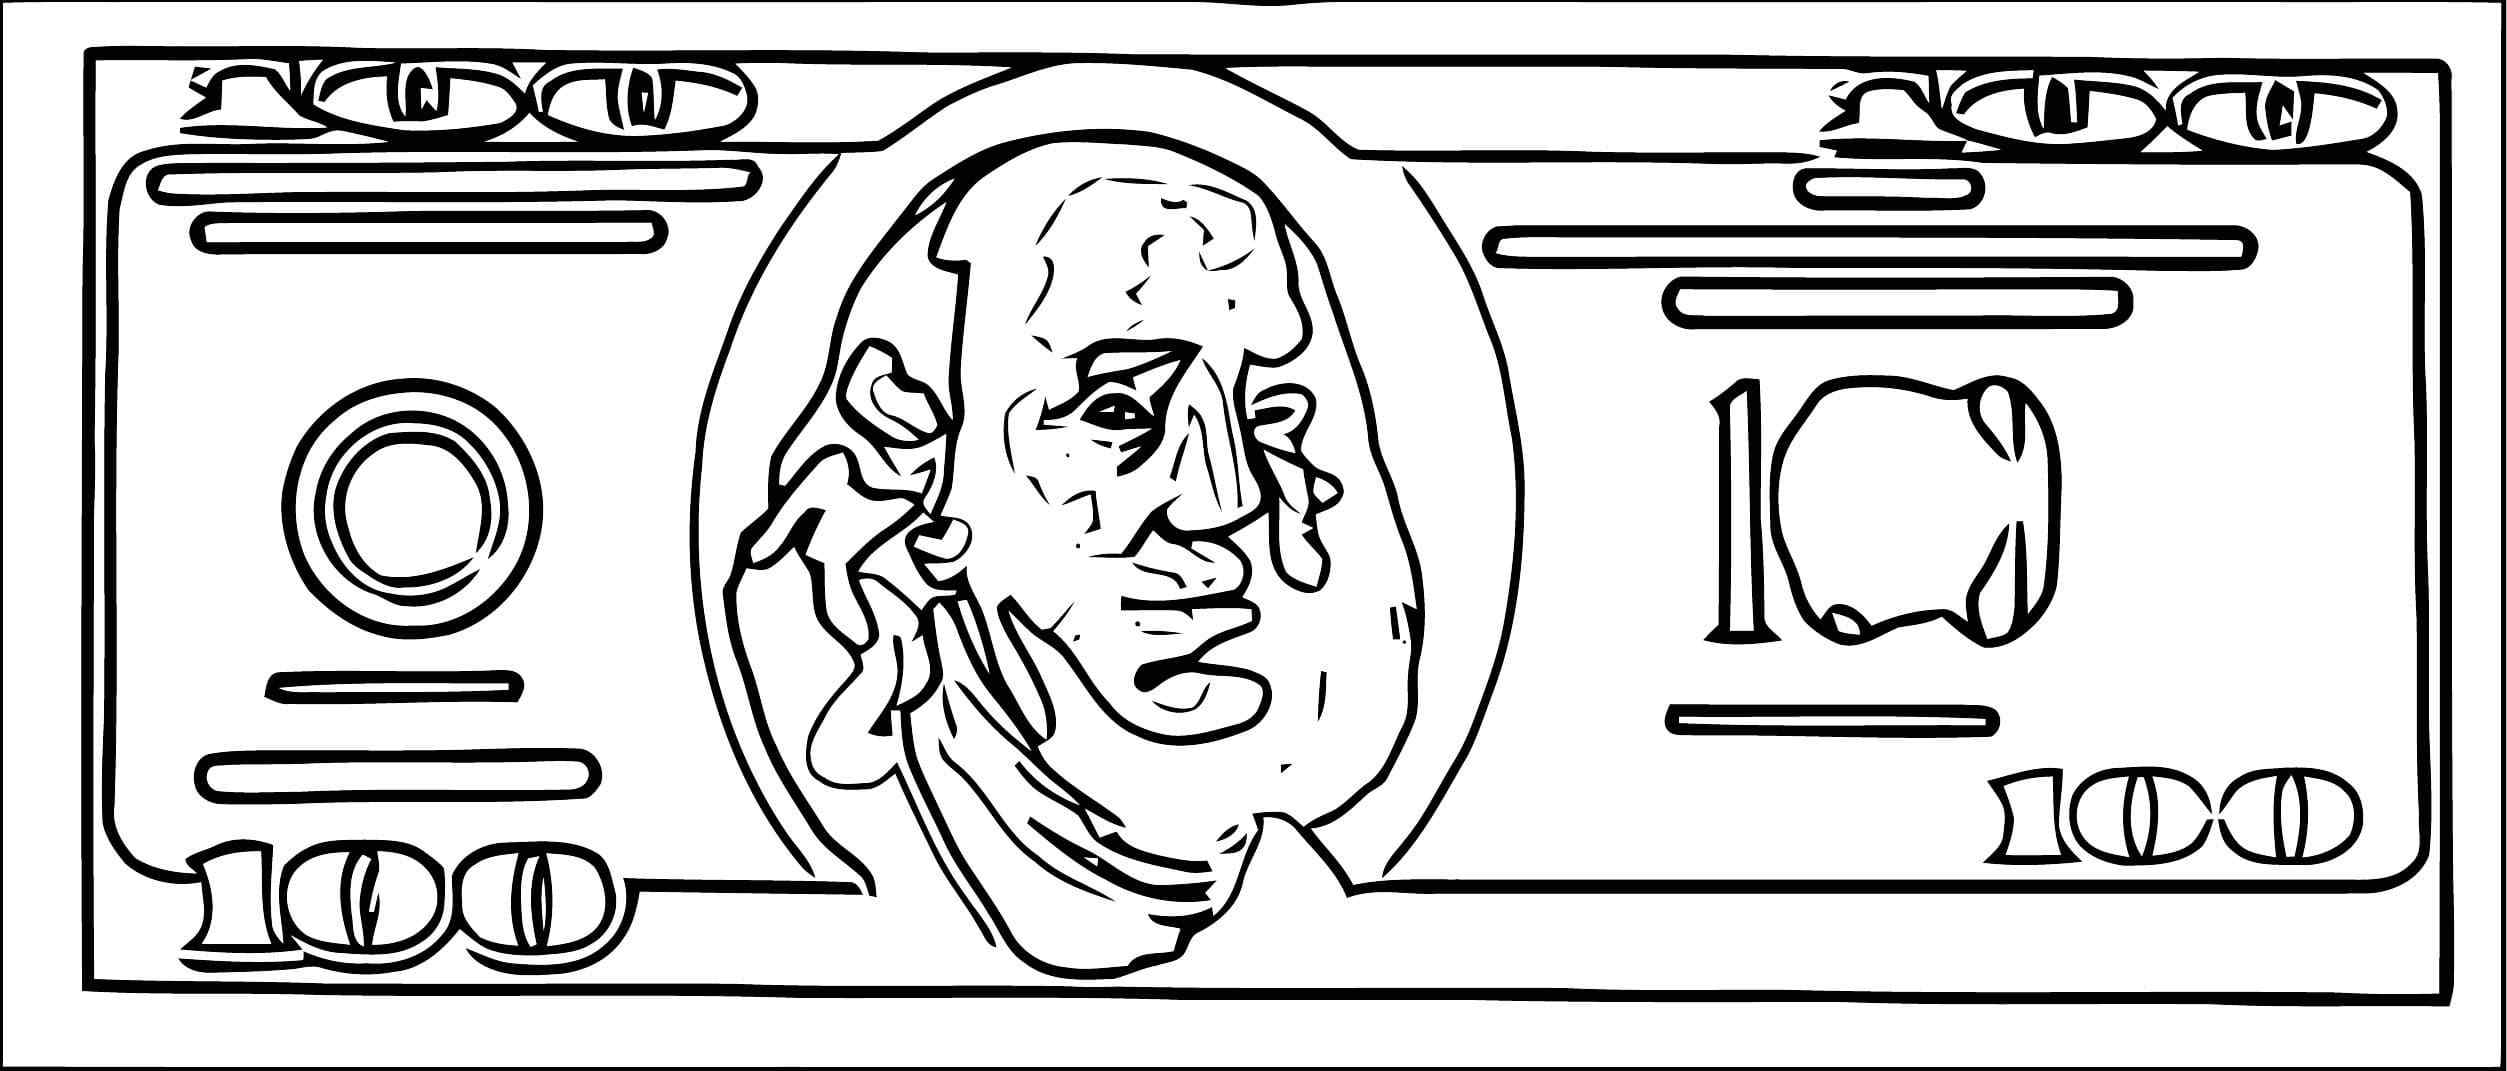 One Hundred Dollar Bill Coloring Page